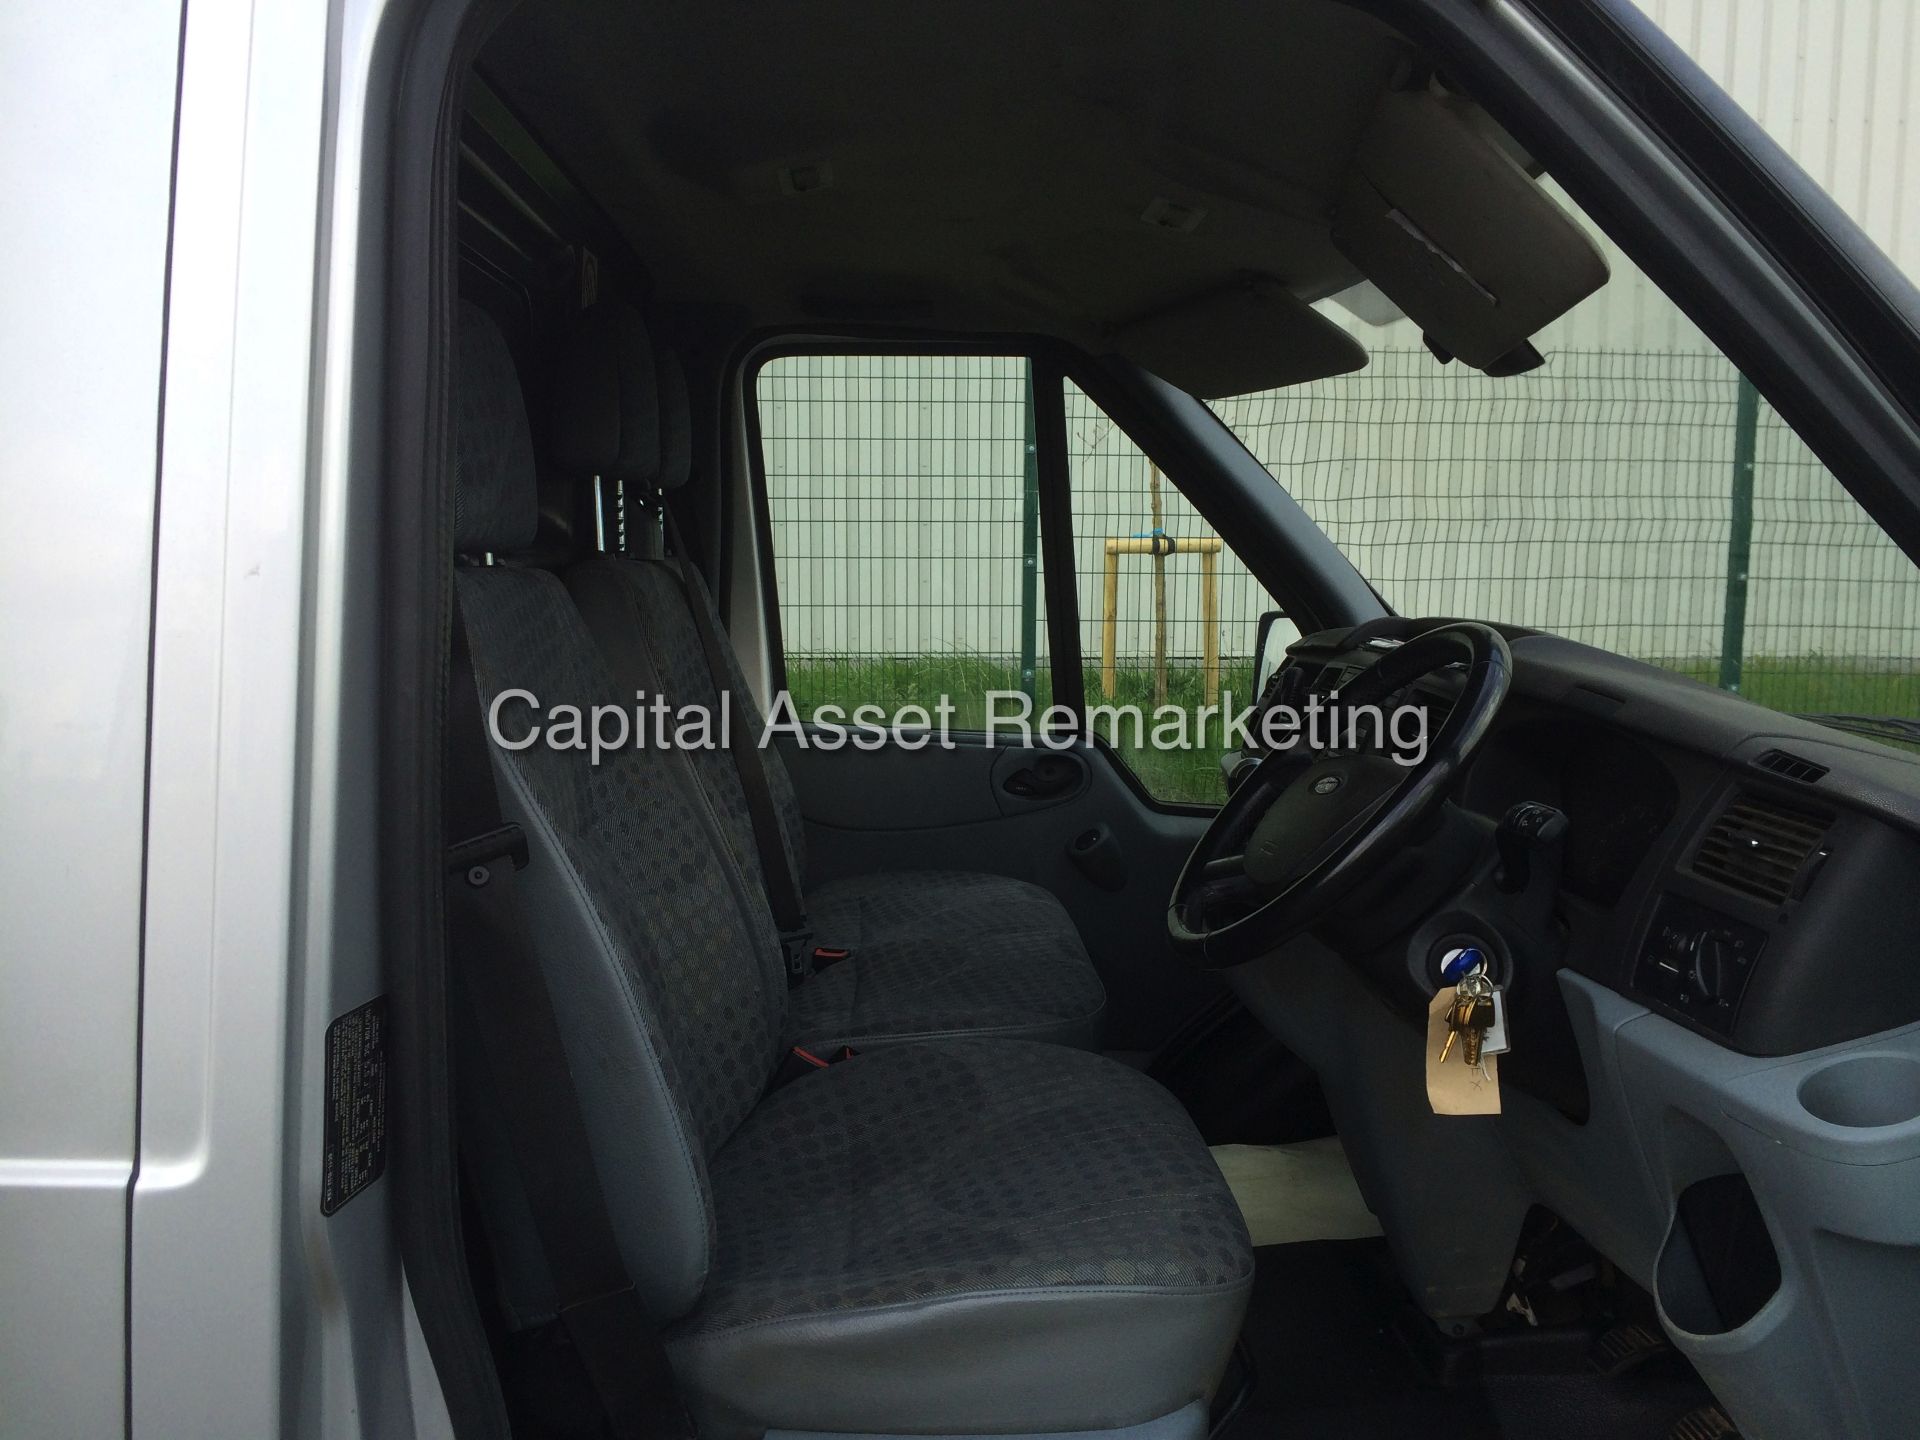 FORD TRANSIT 2.2TDCI "TREND" T260 SWB - 115PSI / 6 SPEED (2012 MODEL) AIR CON - ELEC PACK - SILVER - Image 9 of 19